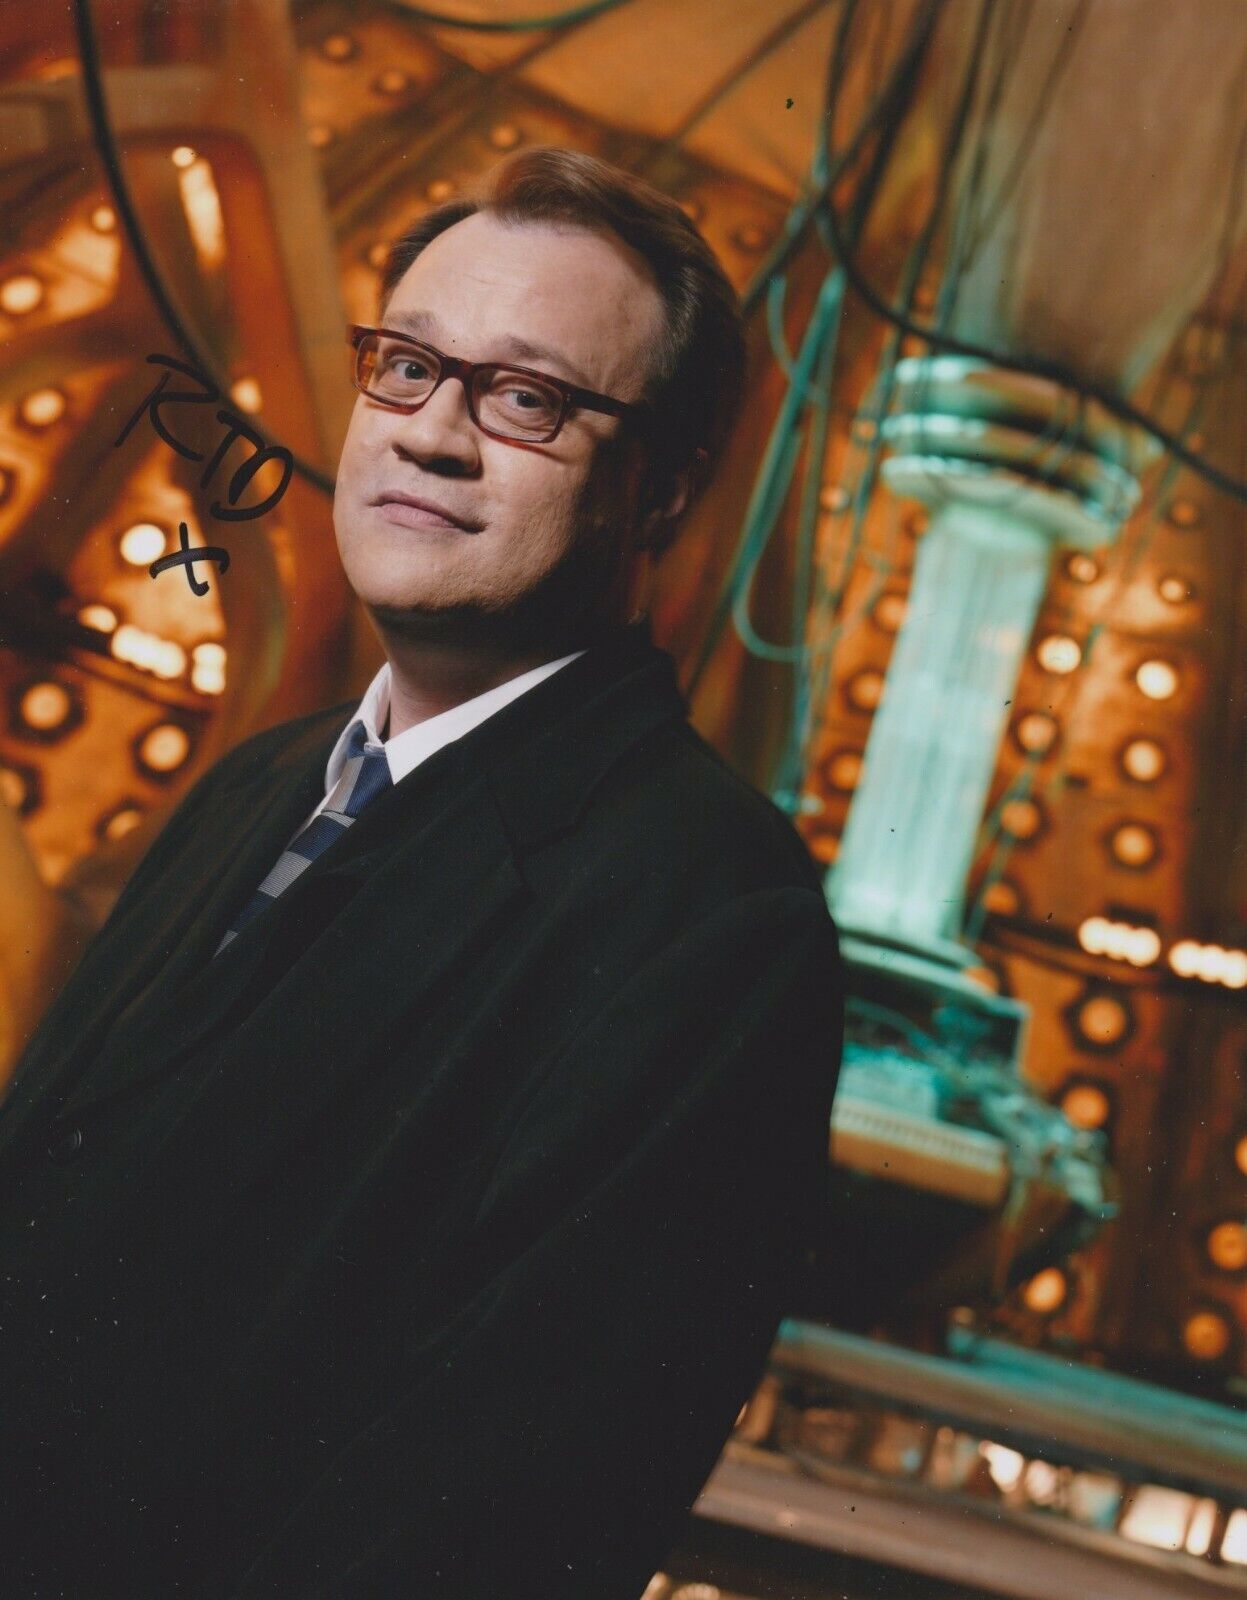 Russell T. Davies Signed Doctor Who 10x8 Photo Poster painting AFTAL